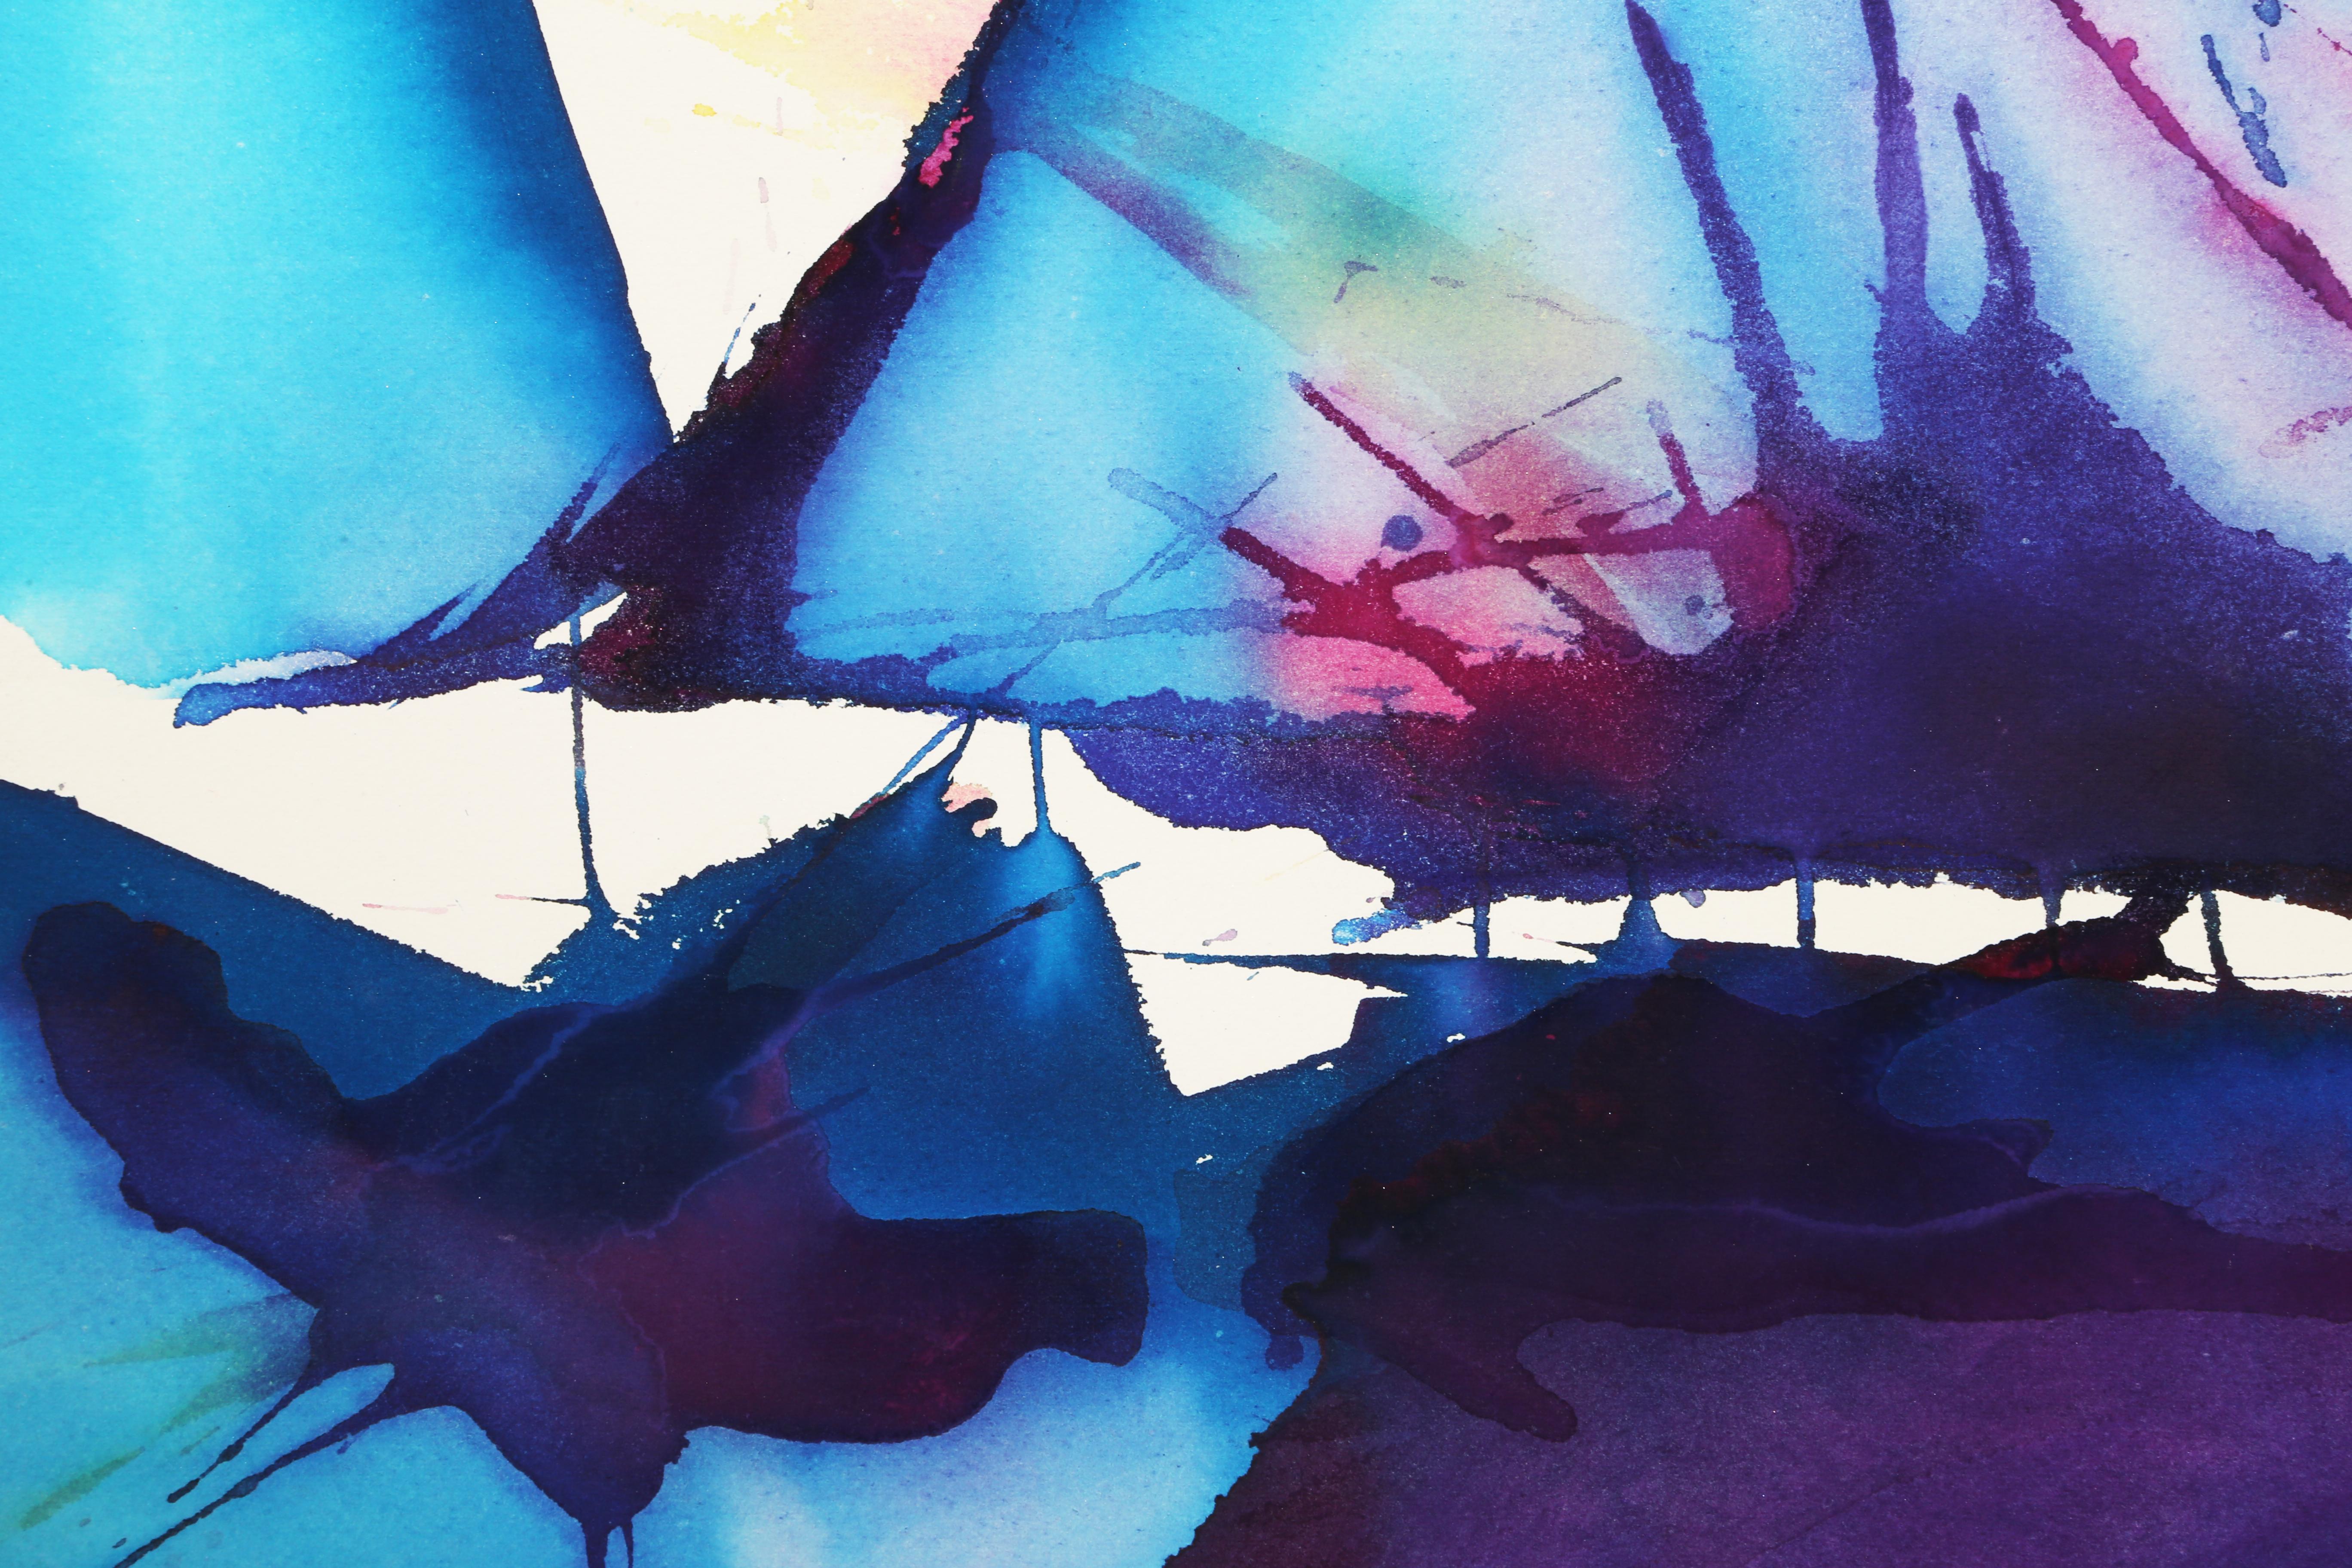 A unique Abstract Expressionist watercolor by Geri Taper. The bold blue and purple splashes give way ever so slightly to streaks of red. This piece is signed, titled, and dated in pencil by the artist.

Dancing Thorns
Geri Taper, American